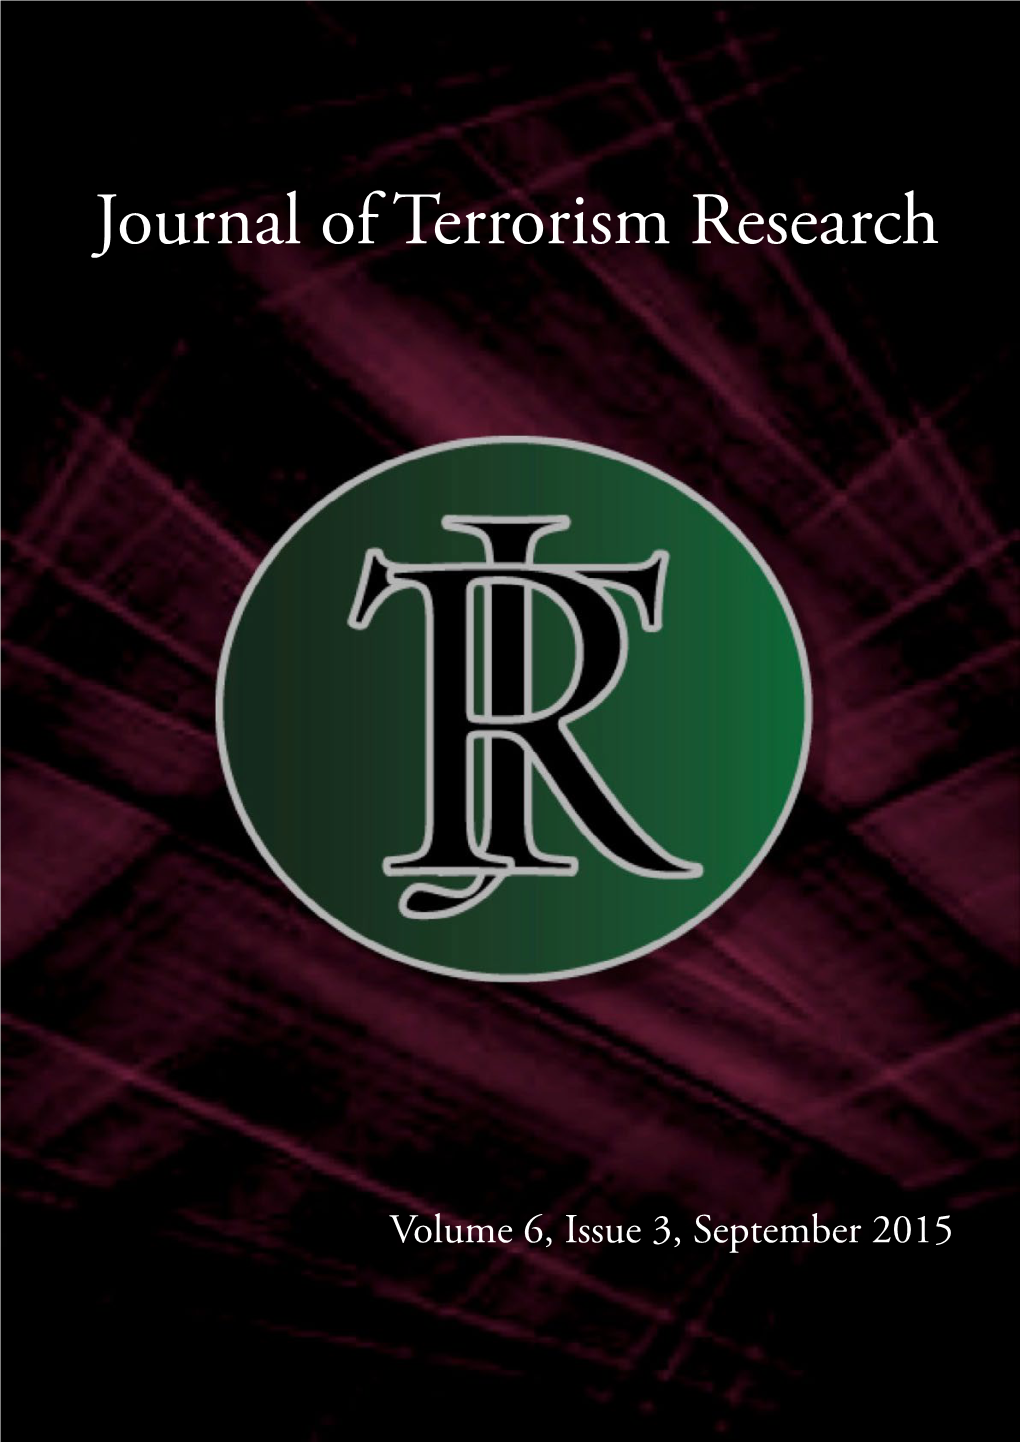 Journal of Terrorism Research